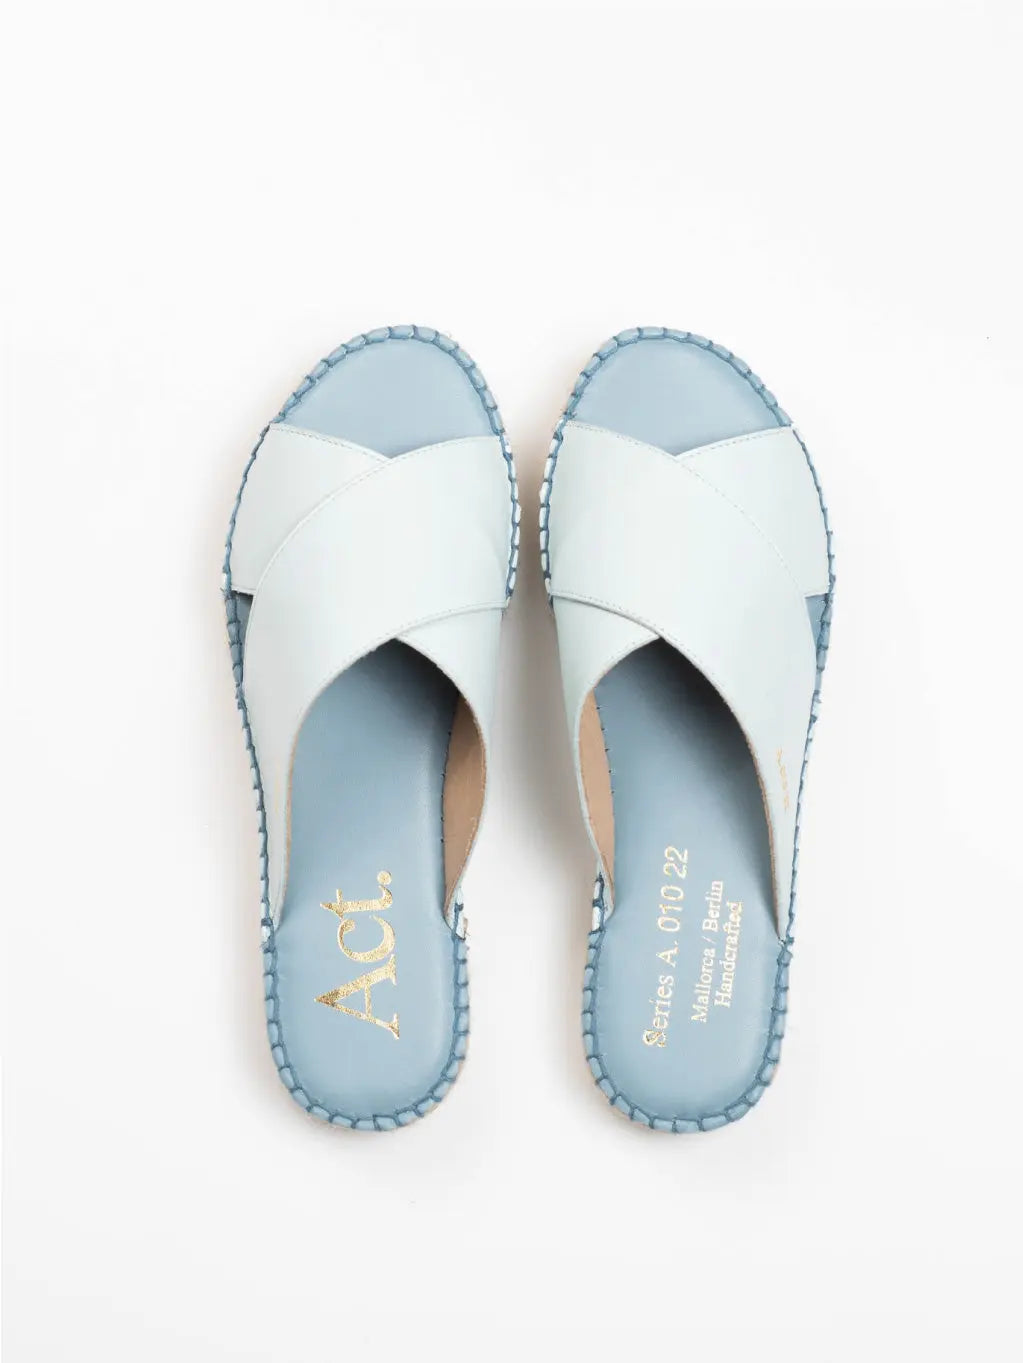 A pair of Uccle Light Blue Espadrilles with crisscross straps and exposed toes. The insole features gold text on the left sandal, and the stitching around the edges is in a matching light blue color. The espadrilles from Act Series are placed on a white background.